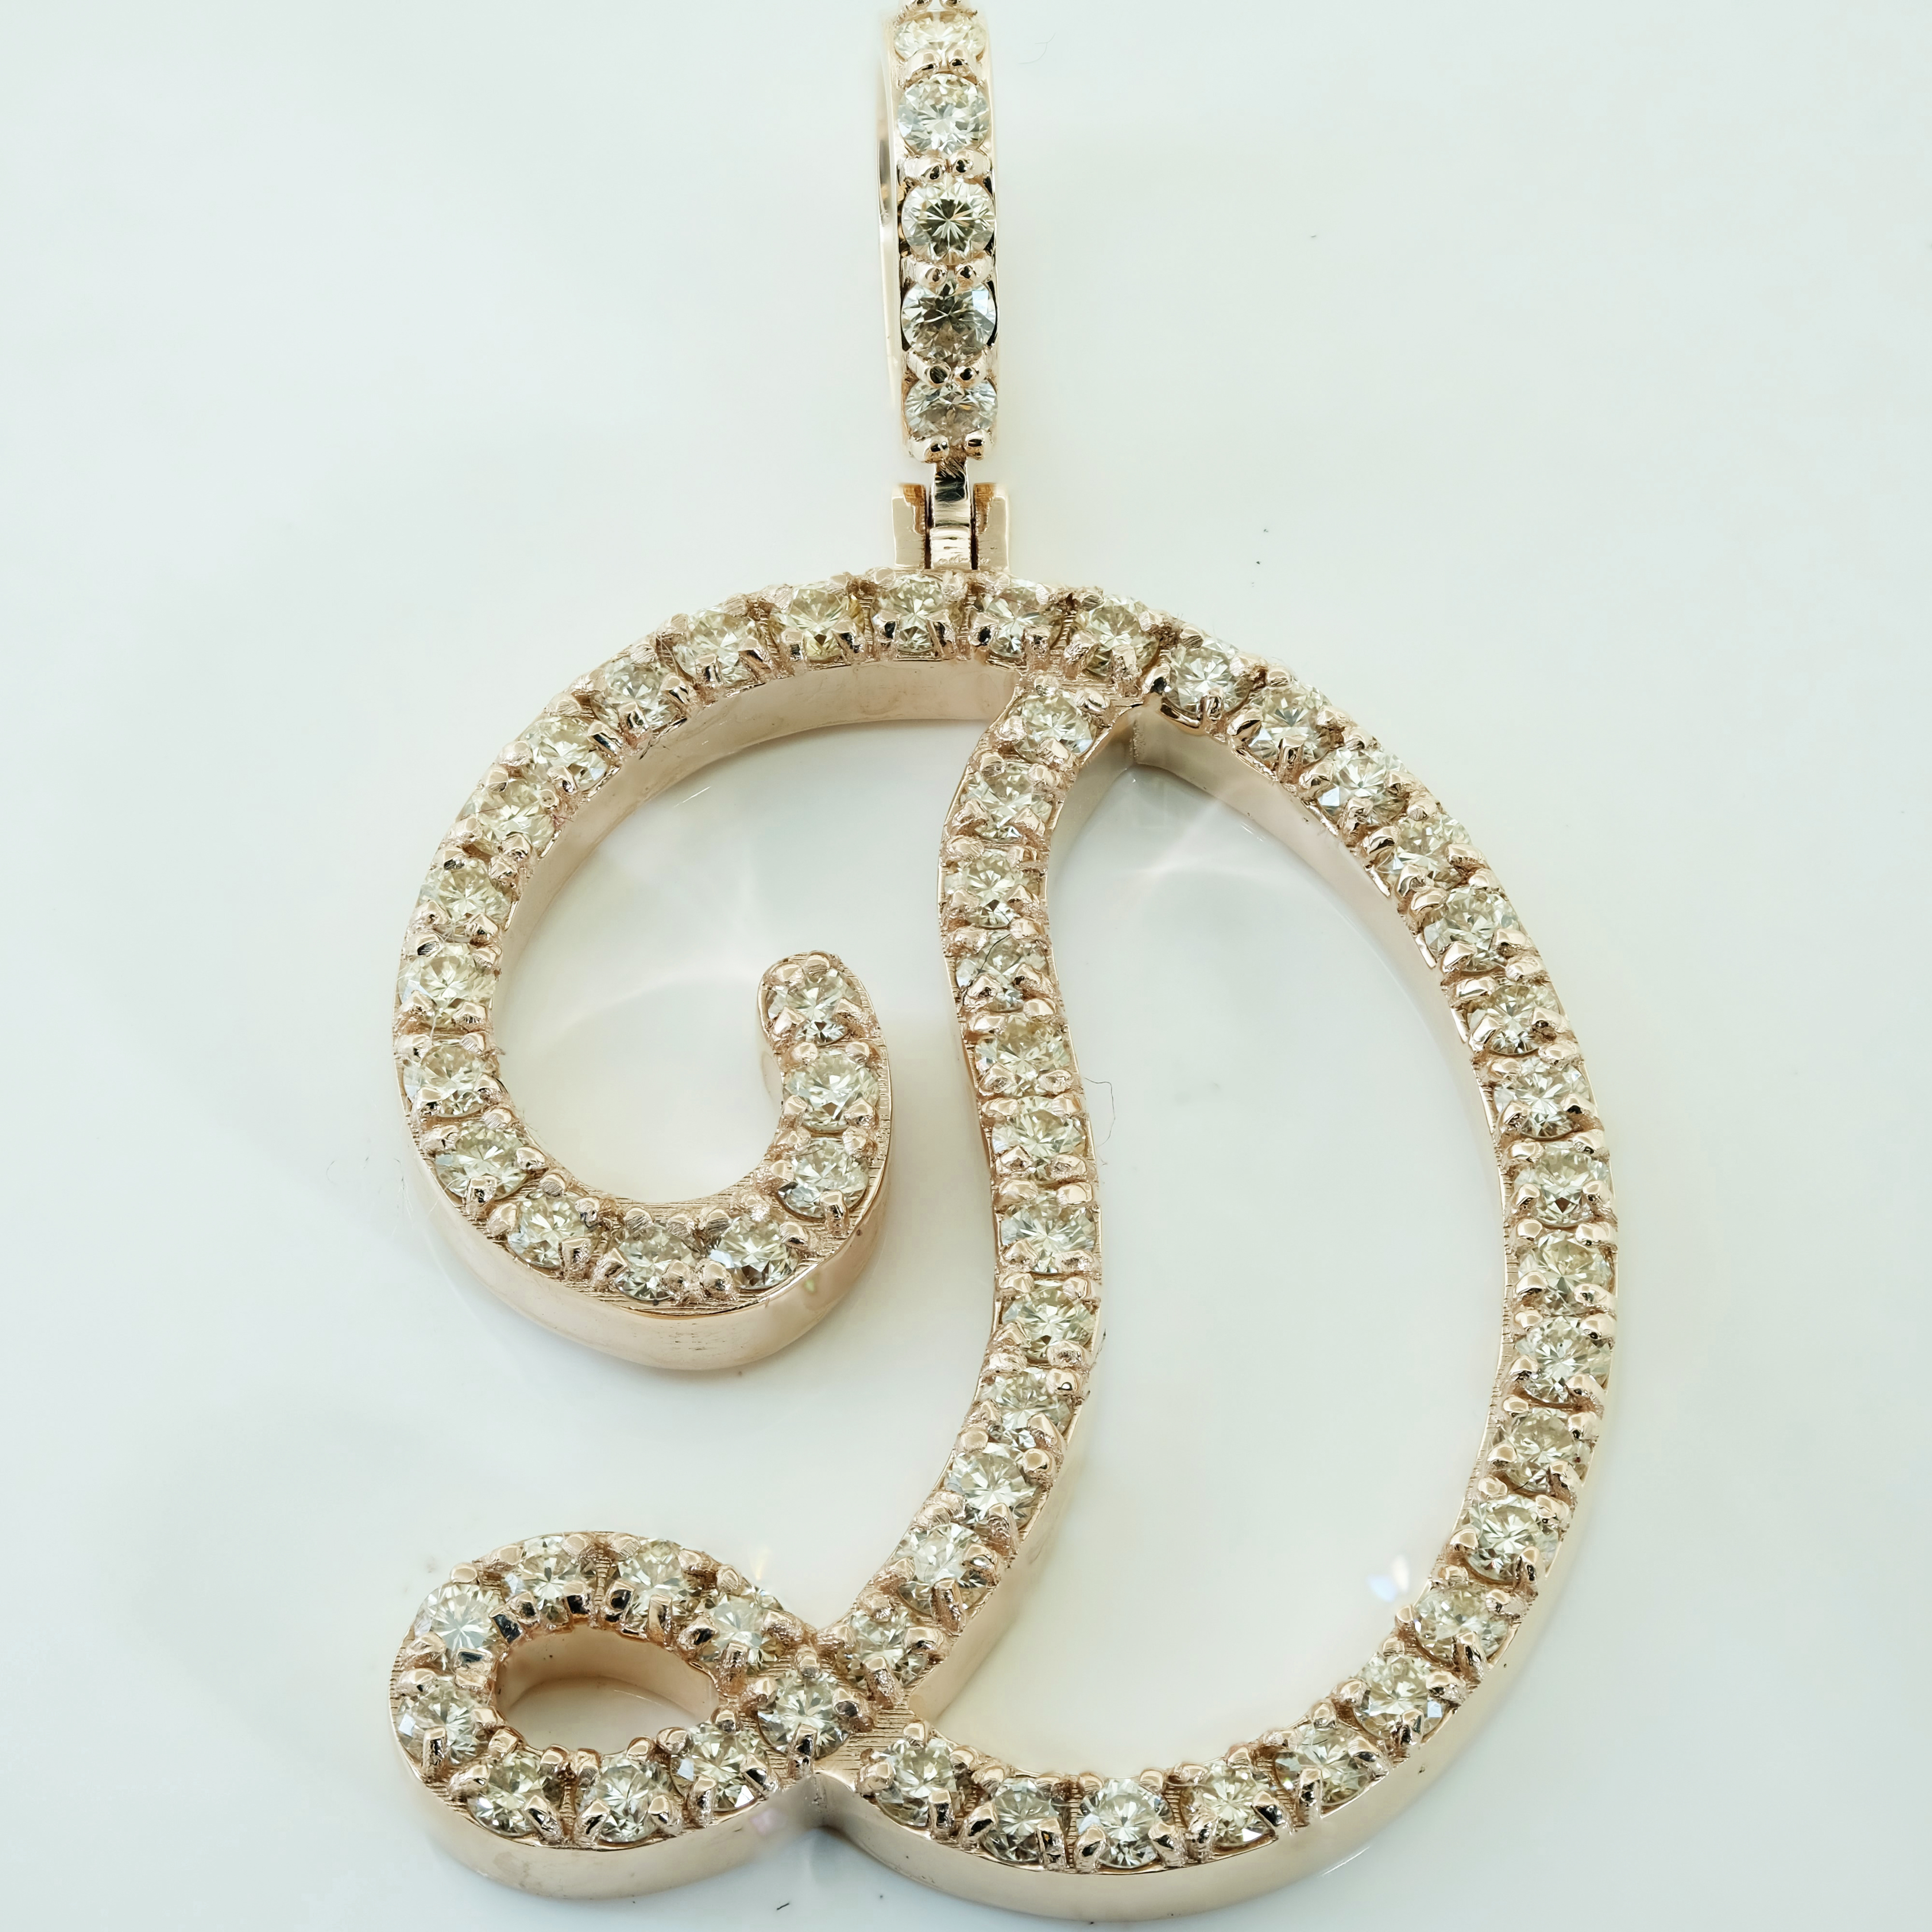 Pre-owned Jewelwesell Initial 'd' Pendant Charm 14k Gold Genuine Round Diamond Script 1.25" 1.07ct